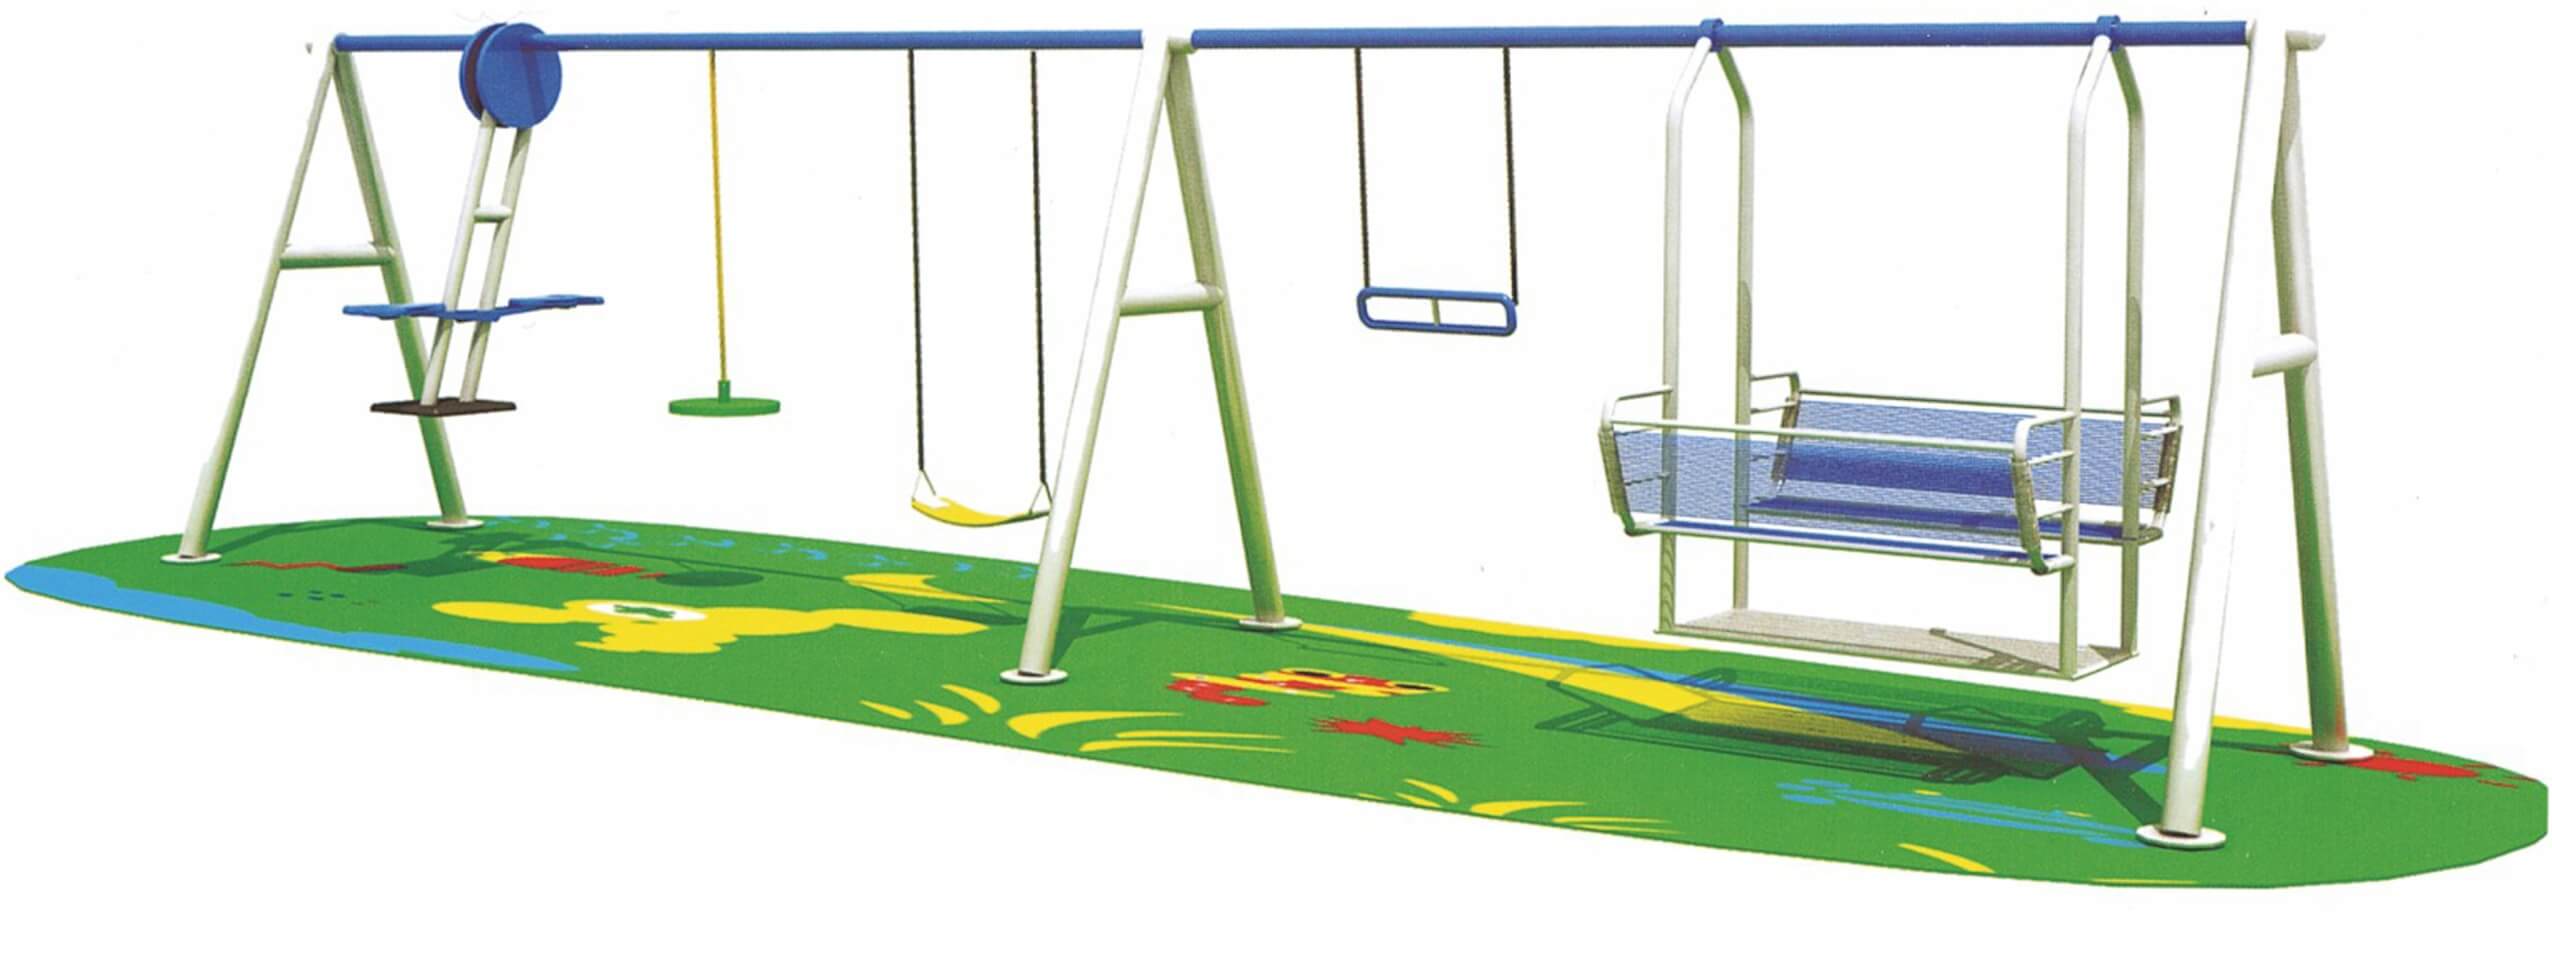 Swing with 5 seaters suitable for kids